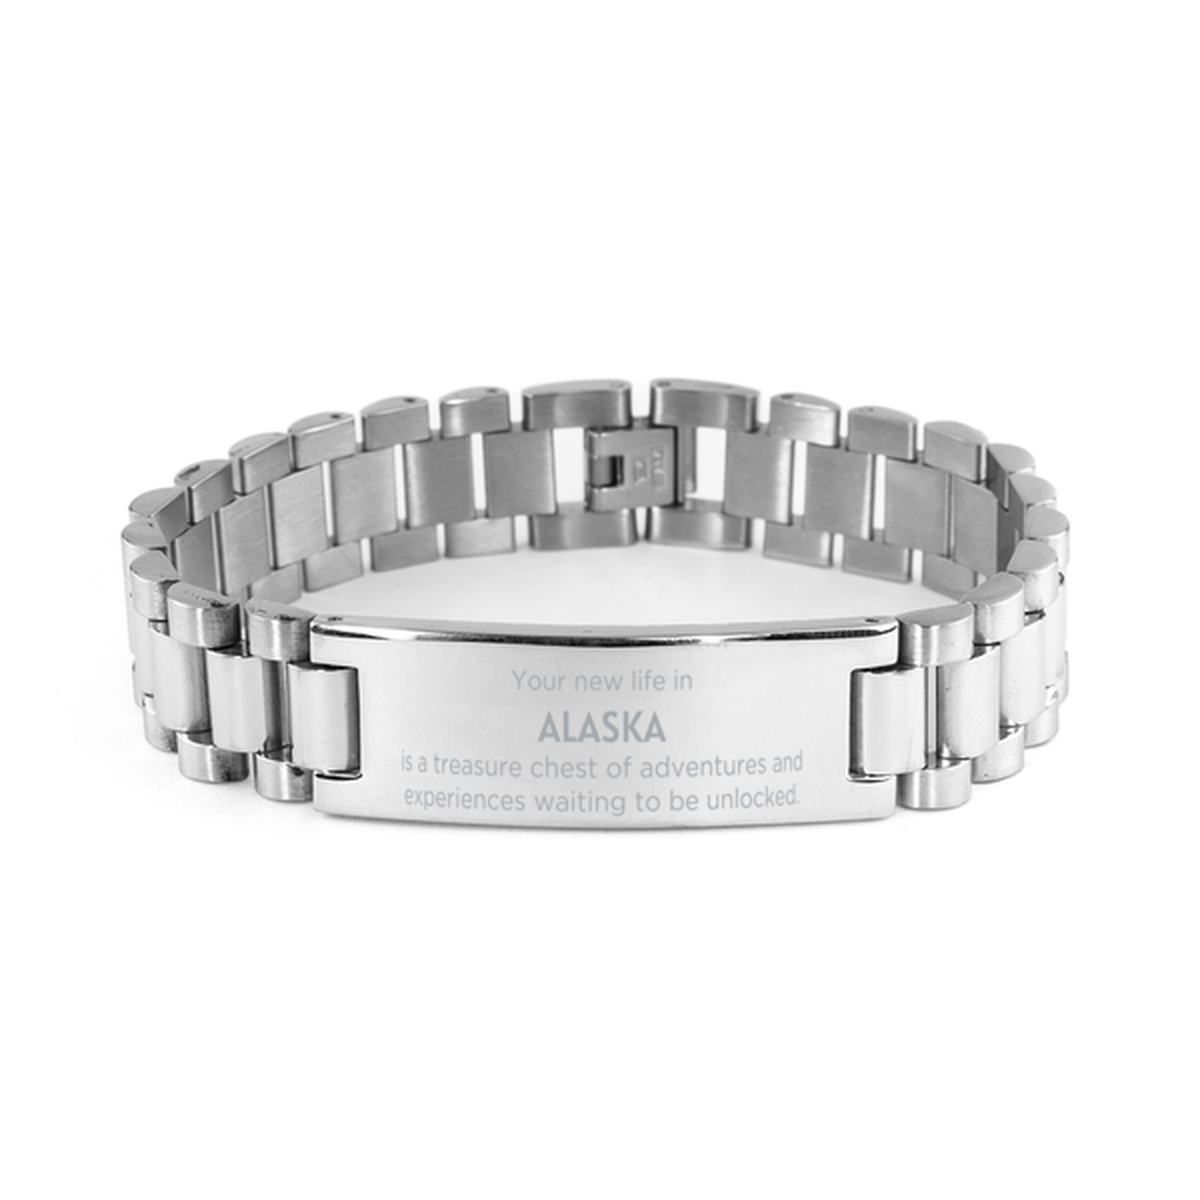 Moving to Alaska Gifts, Your new life in Alaska, Long Distance Alaska Christmas Ladder Stainless Steel Bracelet For Men, Women, Friends, Coworkers